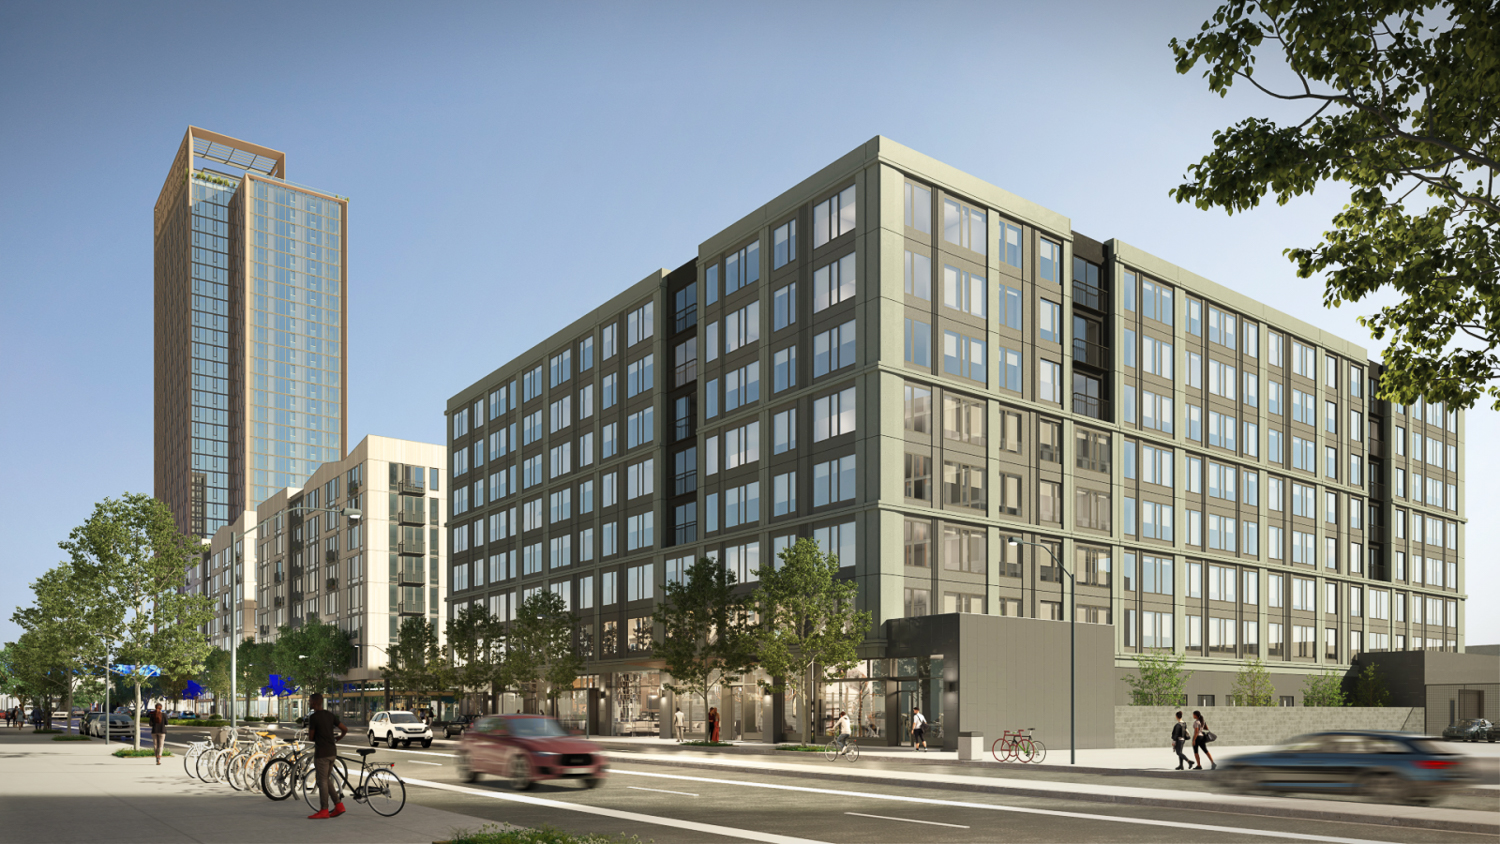 533 Kirkham Street with the potential 32-story tower at 500 Kirkham Street in view, rendering by Solomon Cordwell Buenz